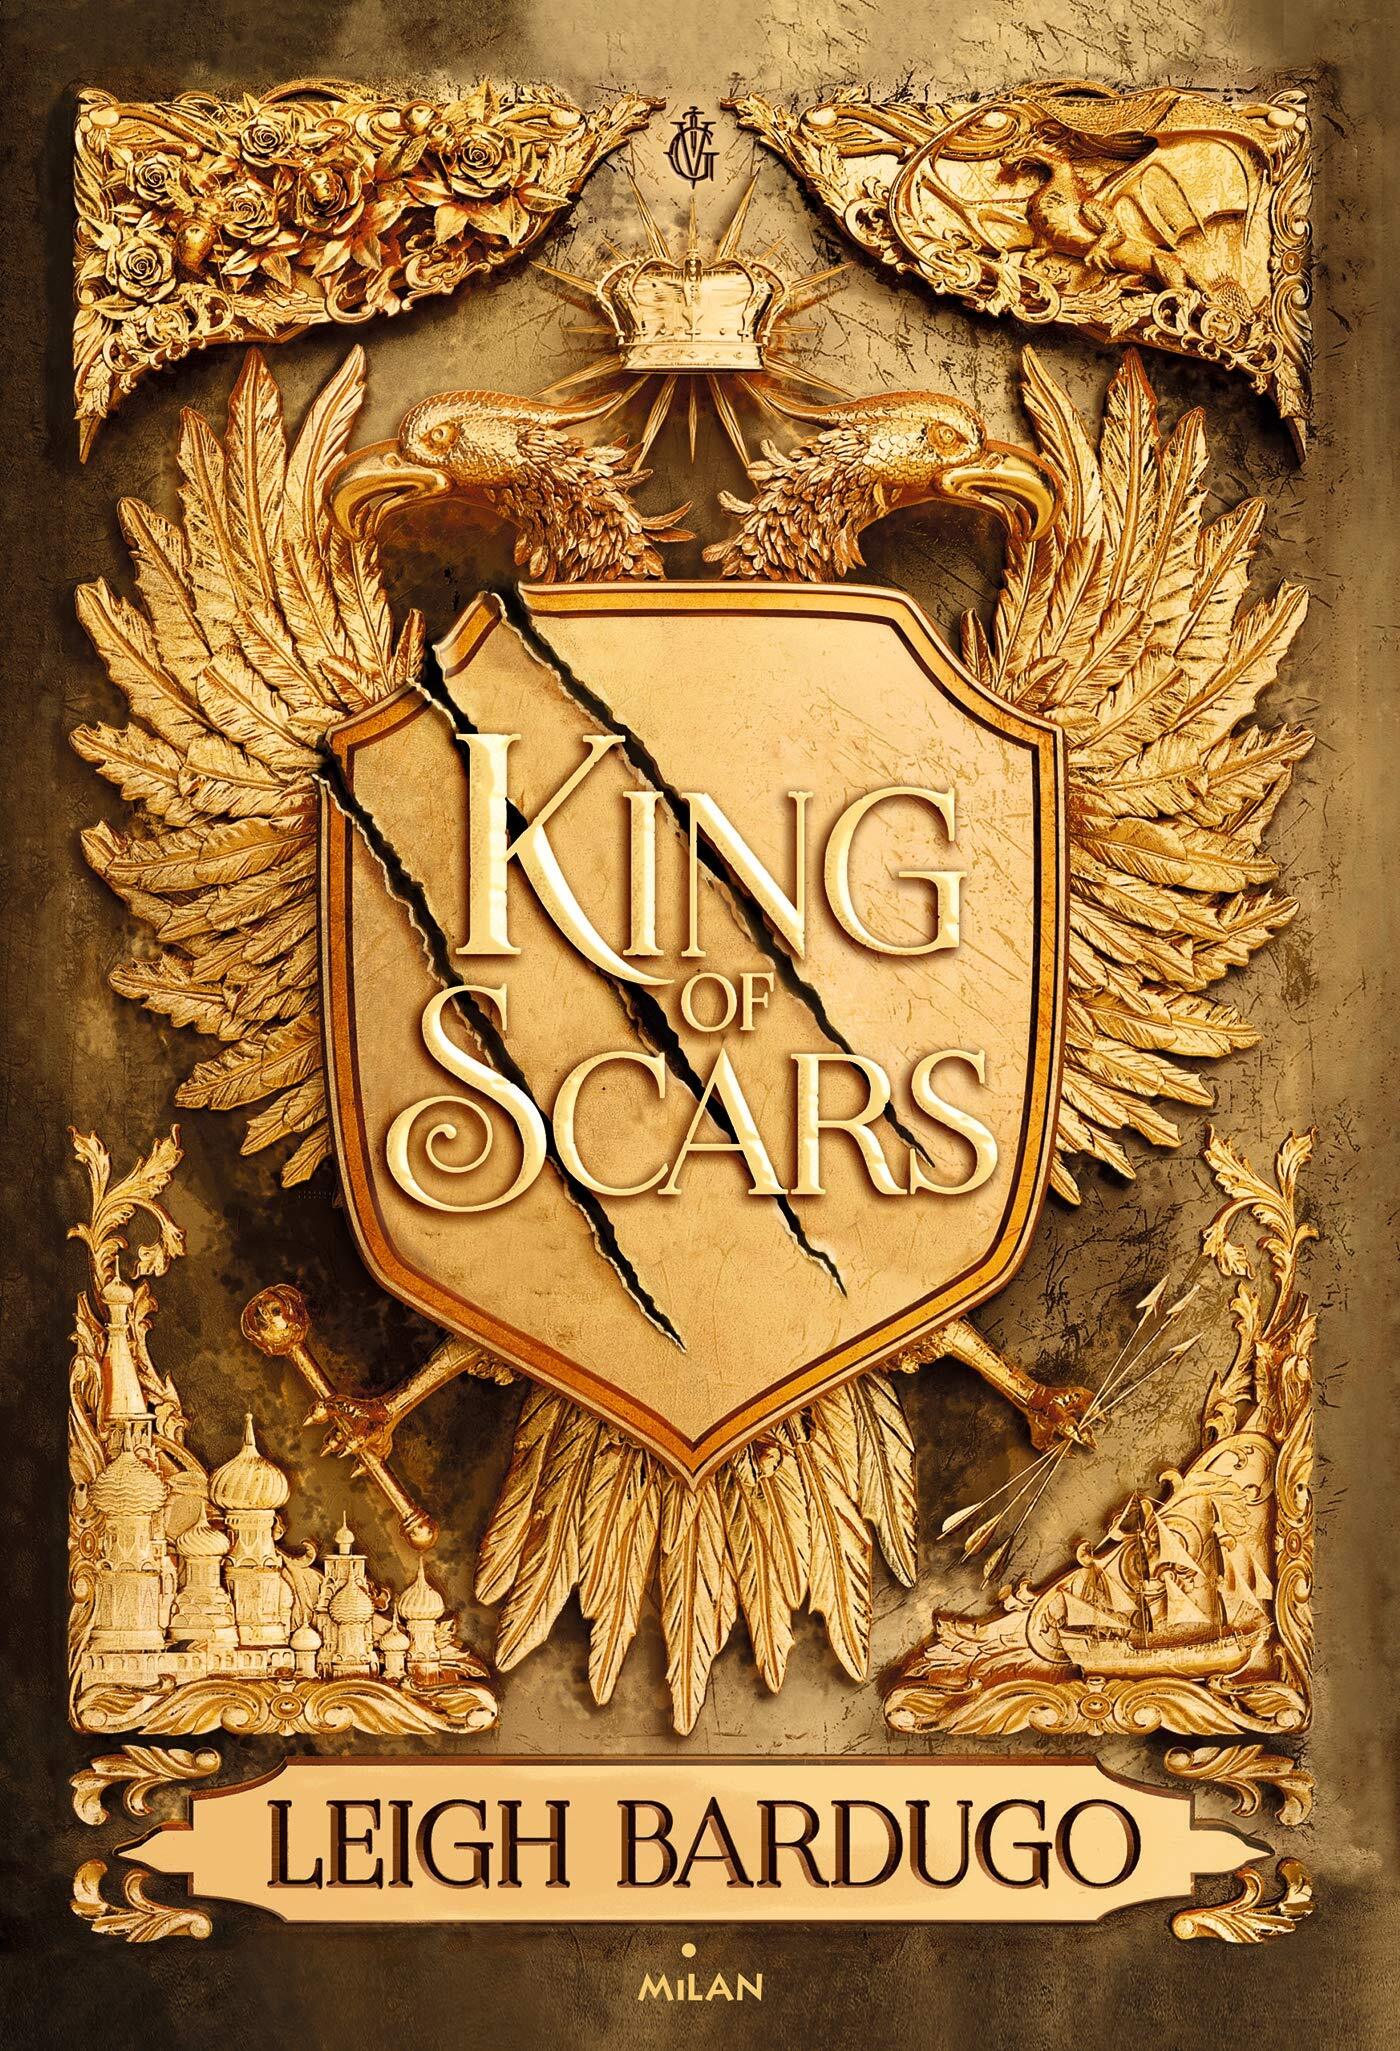 king-of-scars-tome-1-1217036.jpg